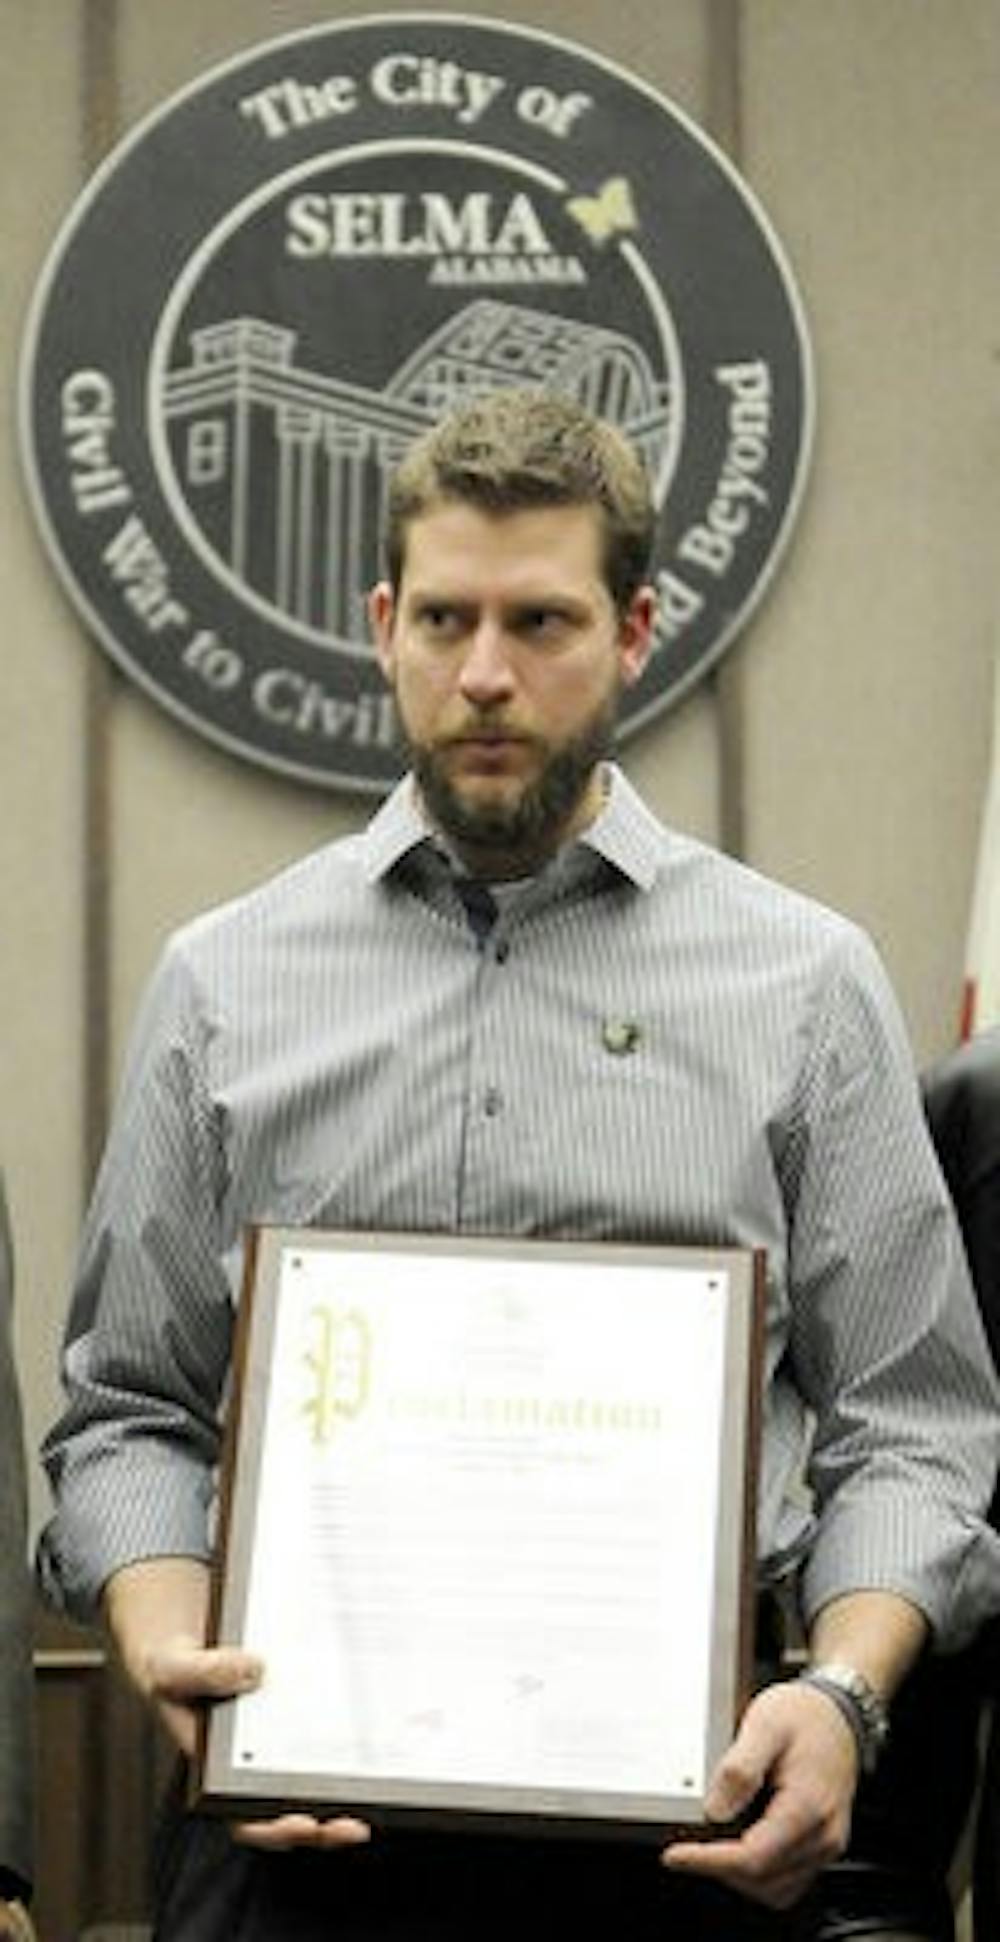 Doug Bacon was honored Tuesday, Jan. 22 at the Selma City Hall for saving a woman from the Alabama River. (Courtesy of Tim Reeves / Selma Times Journal)